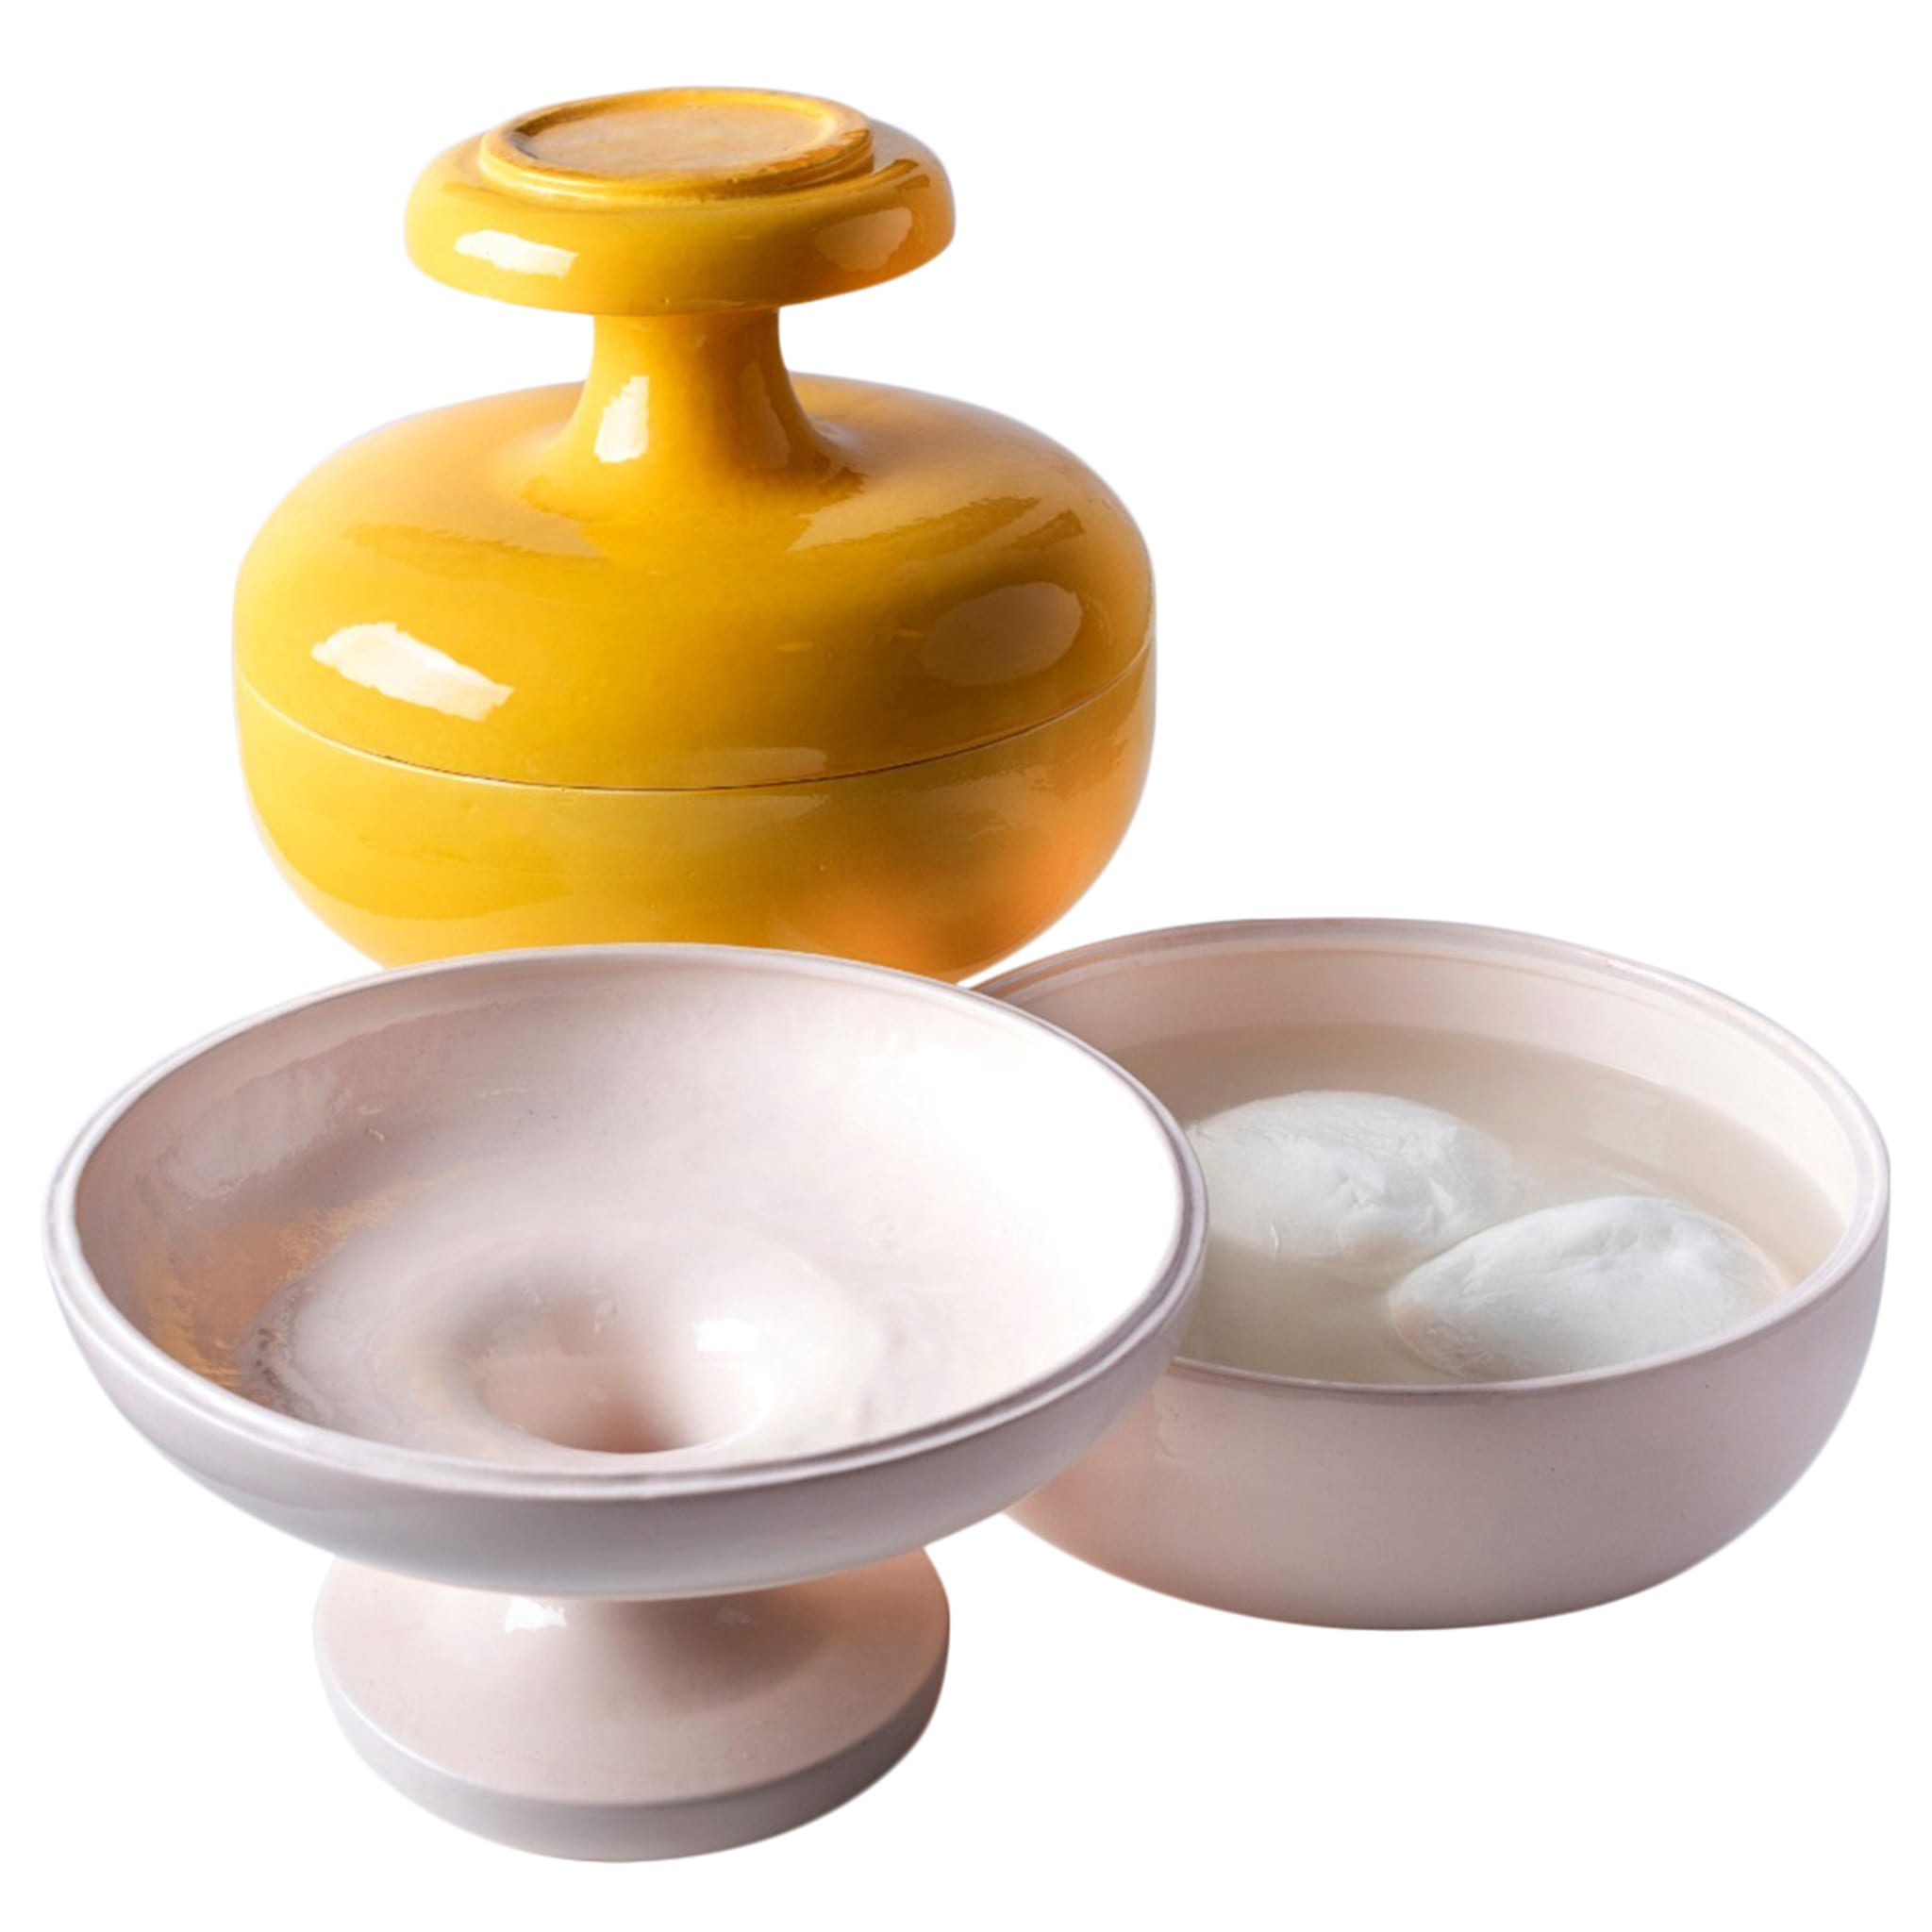 Pyxis white container and serving dish - Alternative view 5